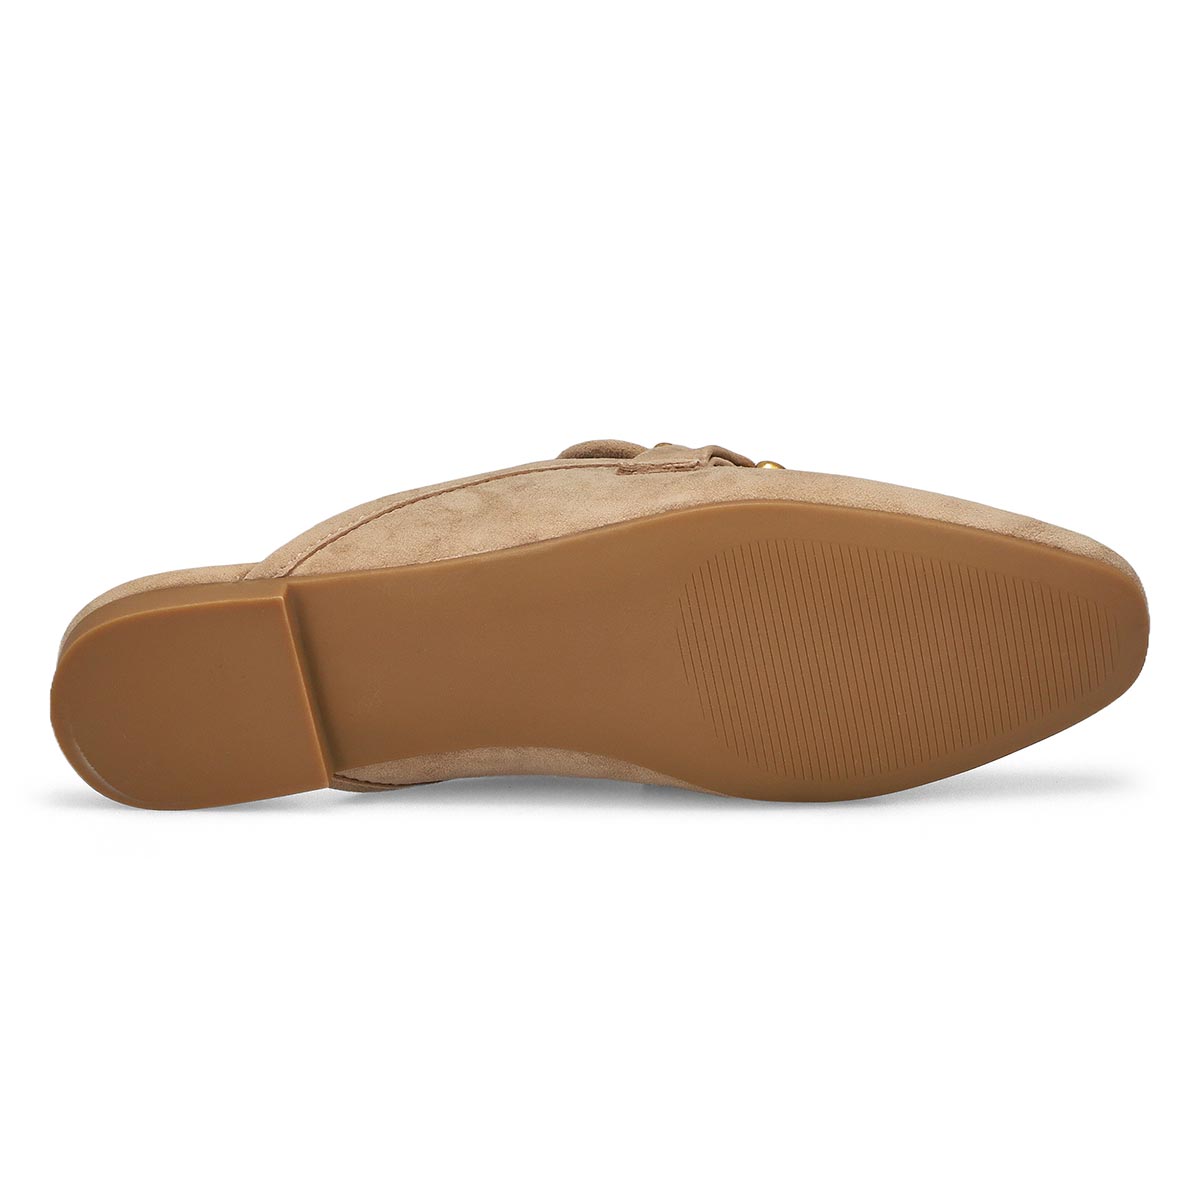 Woemn's Fortunate Dress Flat - Taupe